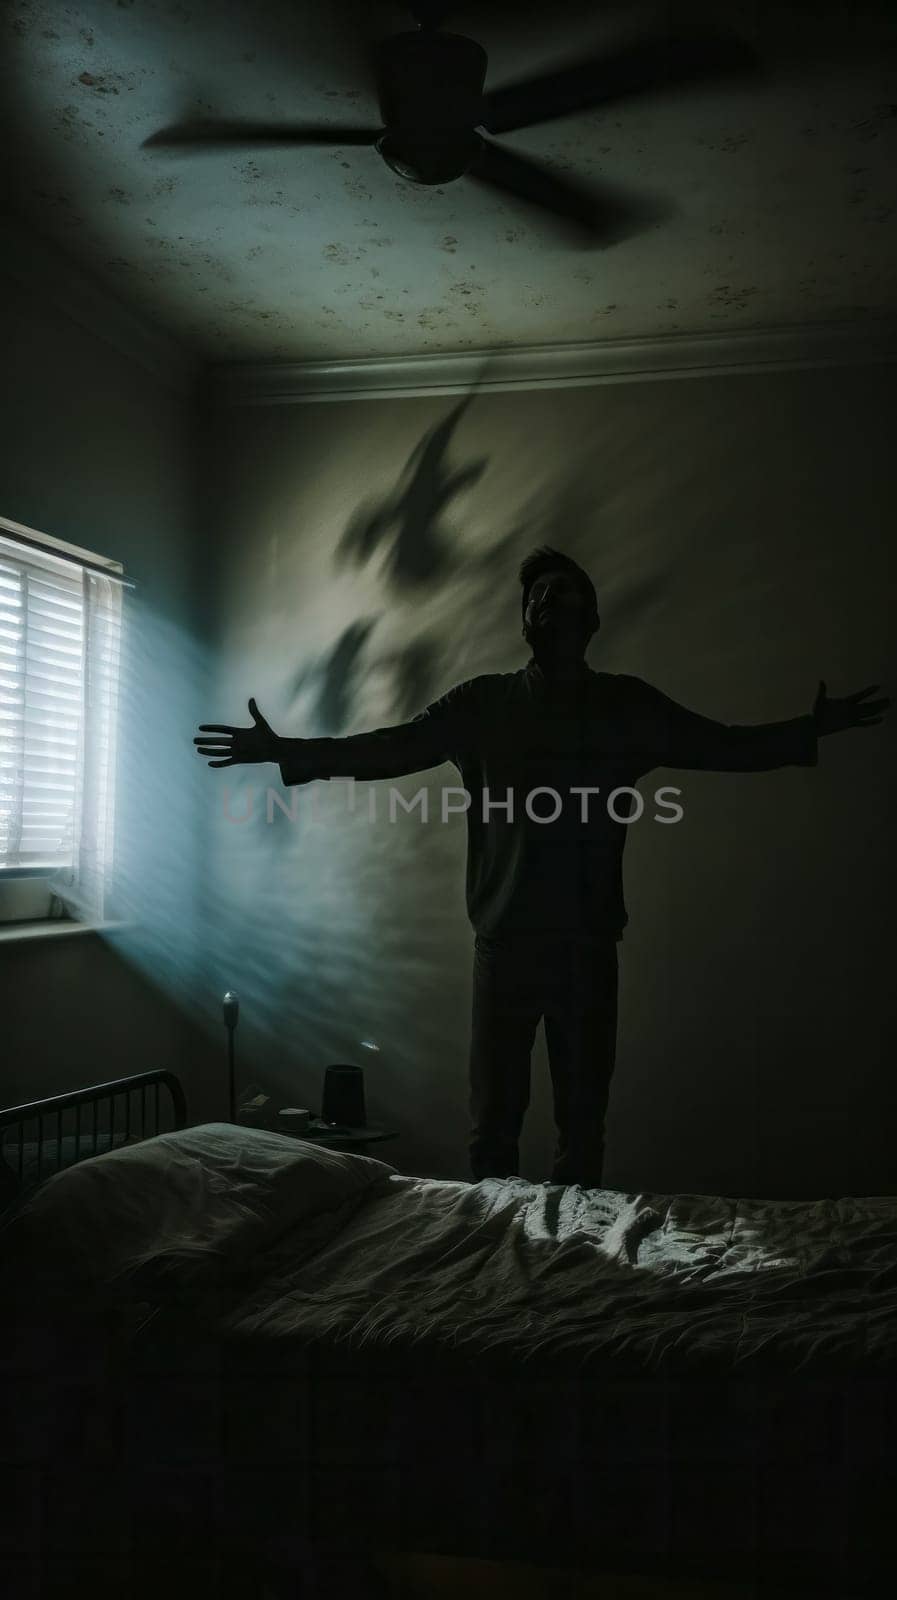 dramatic scene with a person standing on a bed, arms outstretched, in a dark room with shadows cast by a ceiling fan, creating a sense of restlessness or turmoil, insomnia or nightmares, vertical